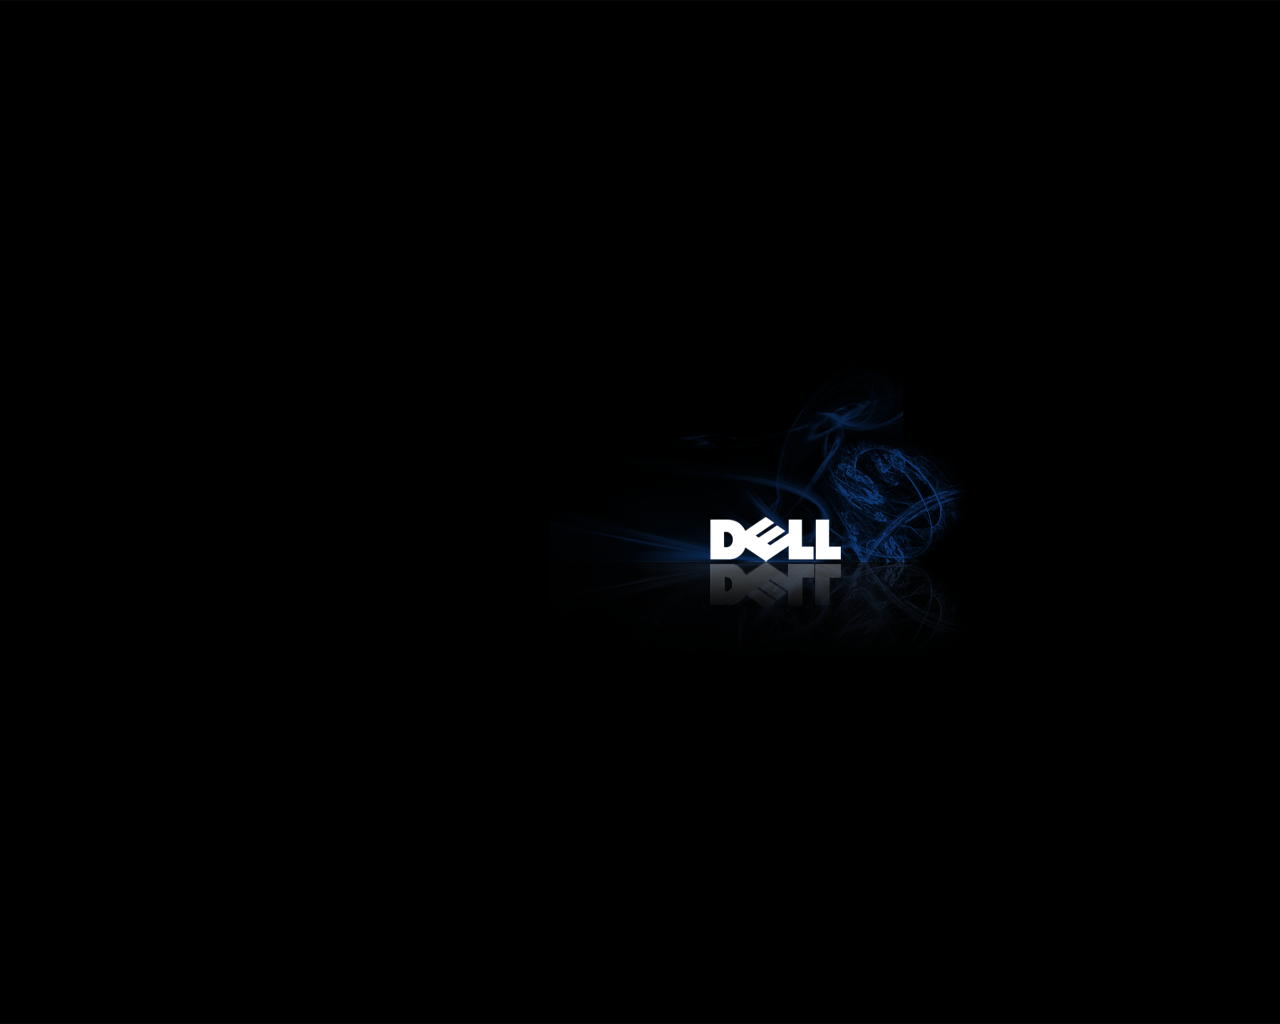 HD Wallpaper For Dell Laptop